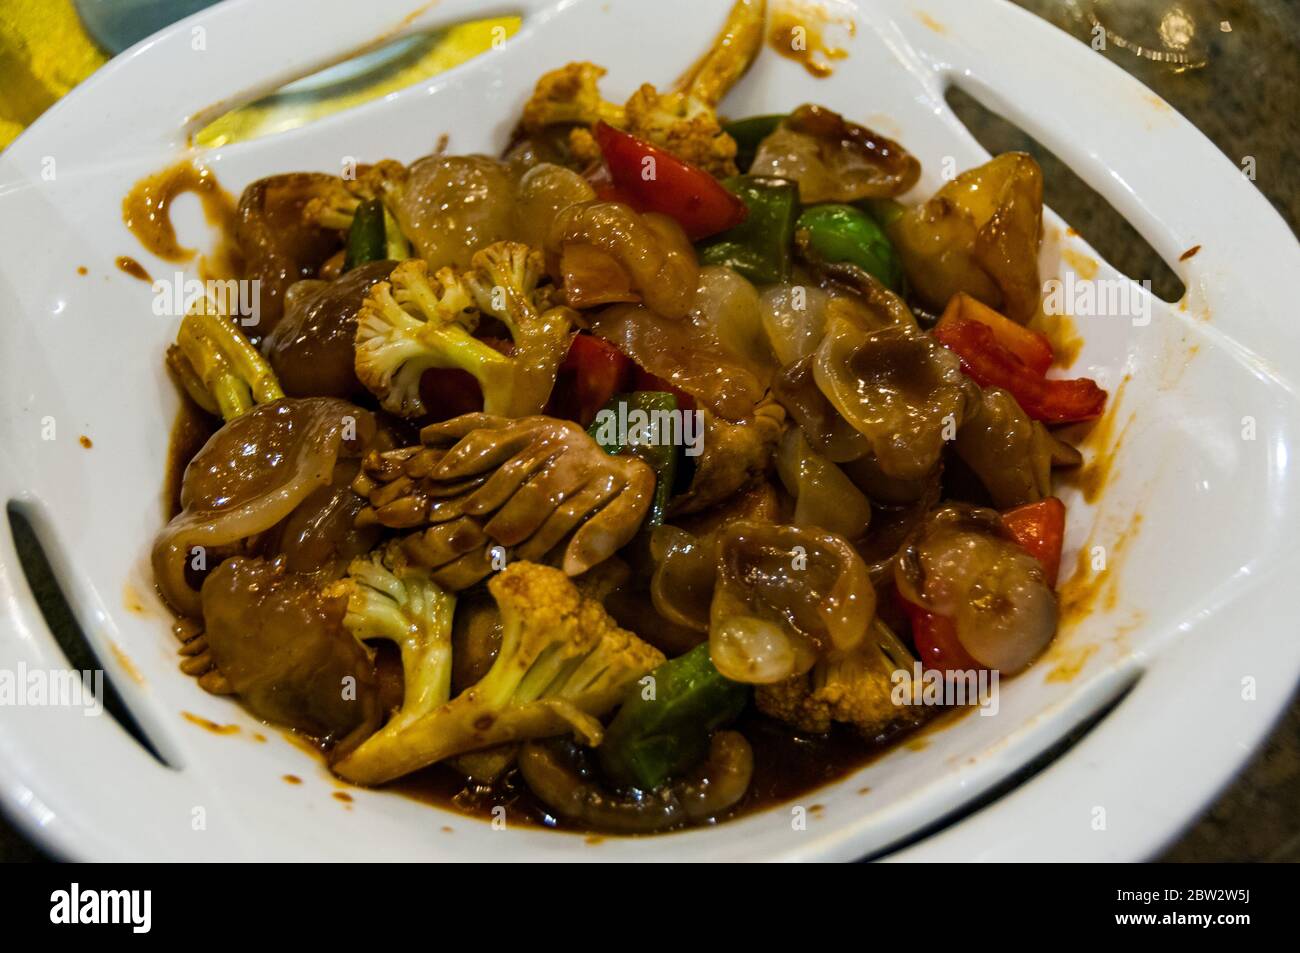 Traditional Min Cuisine dish containing kidney and jellyfish along with vegetables served at a local restaurant in Fuzhou Stock Photo